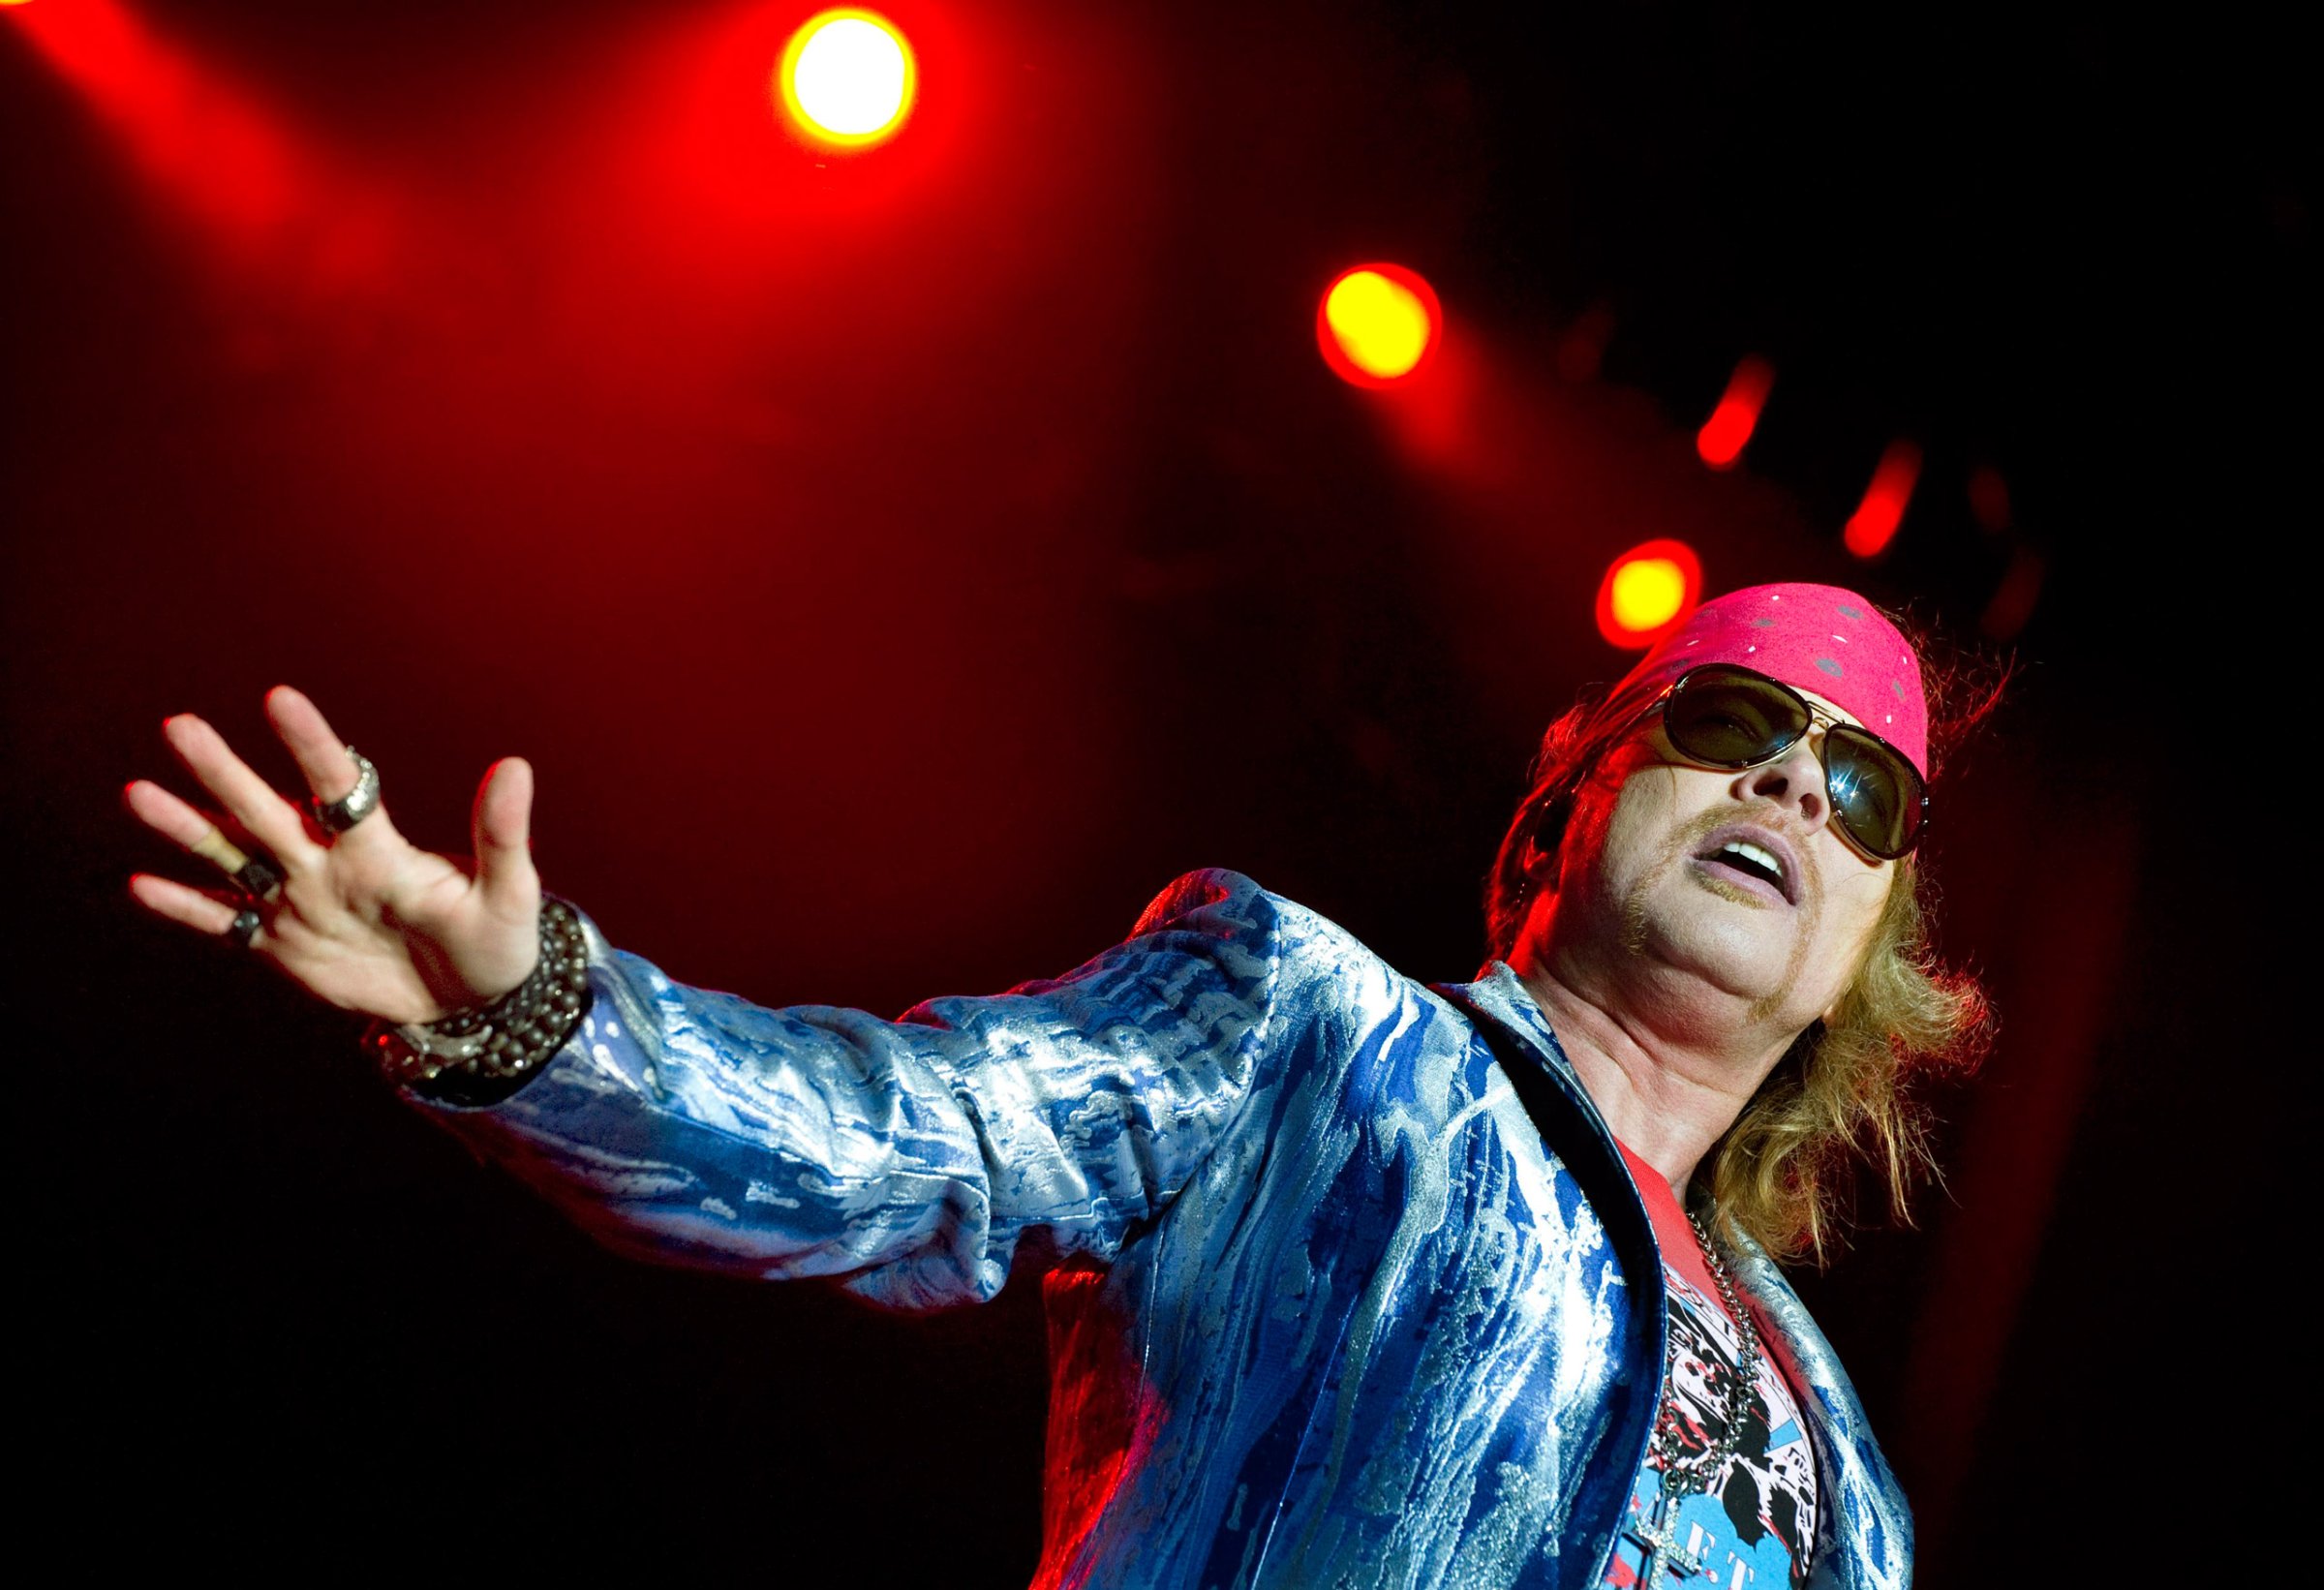 Axl Rose of Guns N' Roses performs during the Sweden Rock Festival 2010 in Solvesborg, Sweden, June 12, 2010. REUTERS/Claudio Bresciani/Scanpix Sweden (SWEDEN - Tags: ENTERTAINMENT) SWEDEN OUT. NO COMMERCIAL OR EDITORIAL SALES IN SWEDEN - RTR2F3B1